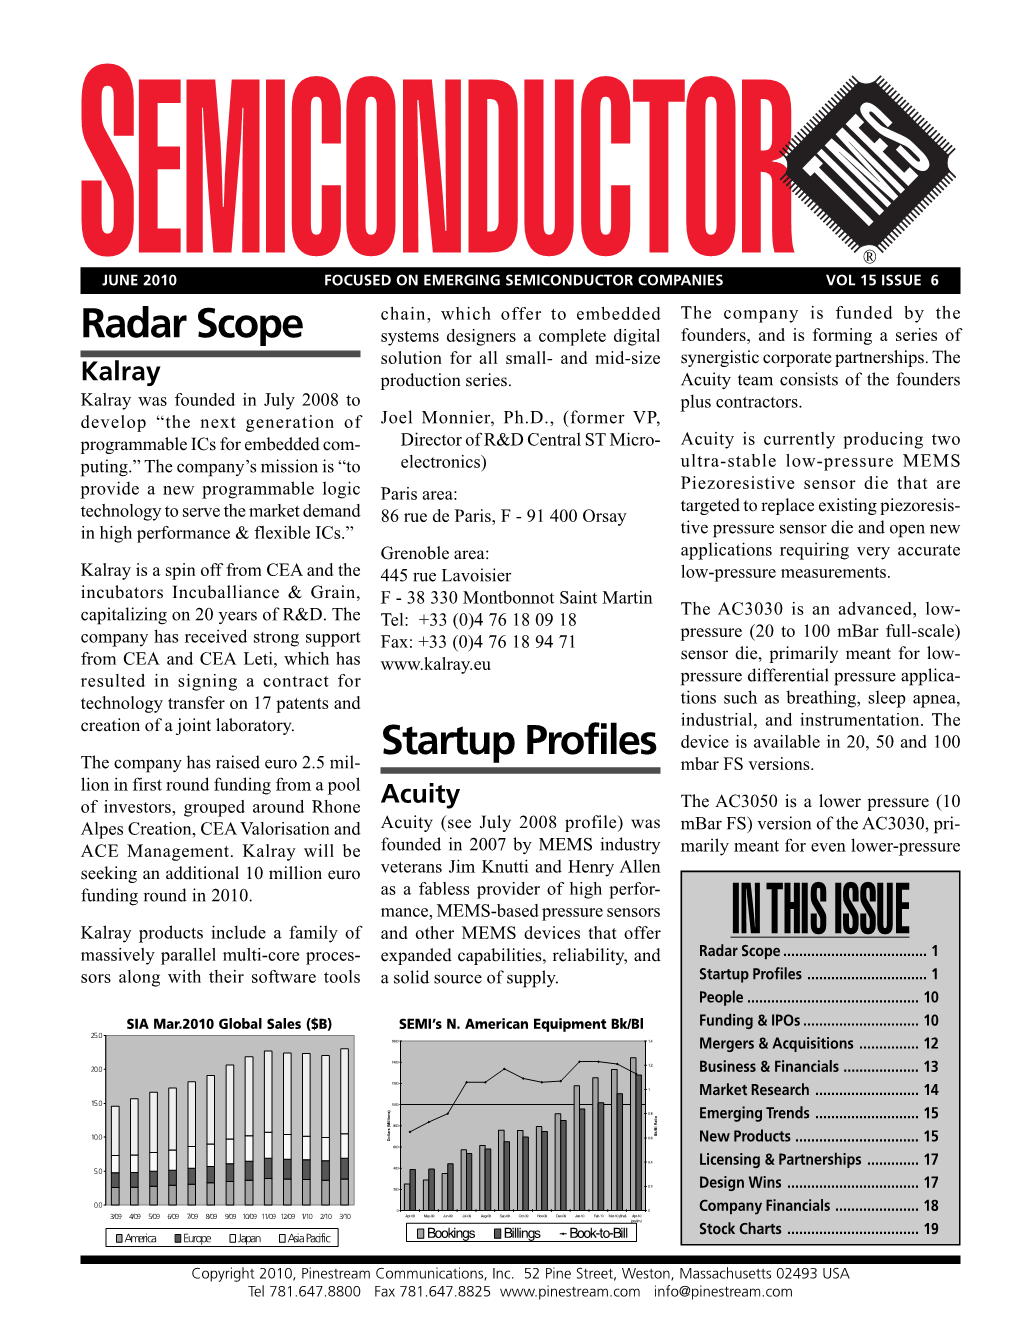 Semiconductor Times Covers Vennsa in Startup Profiles